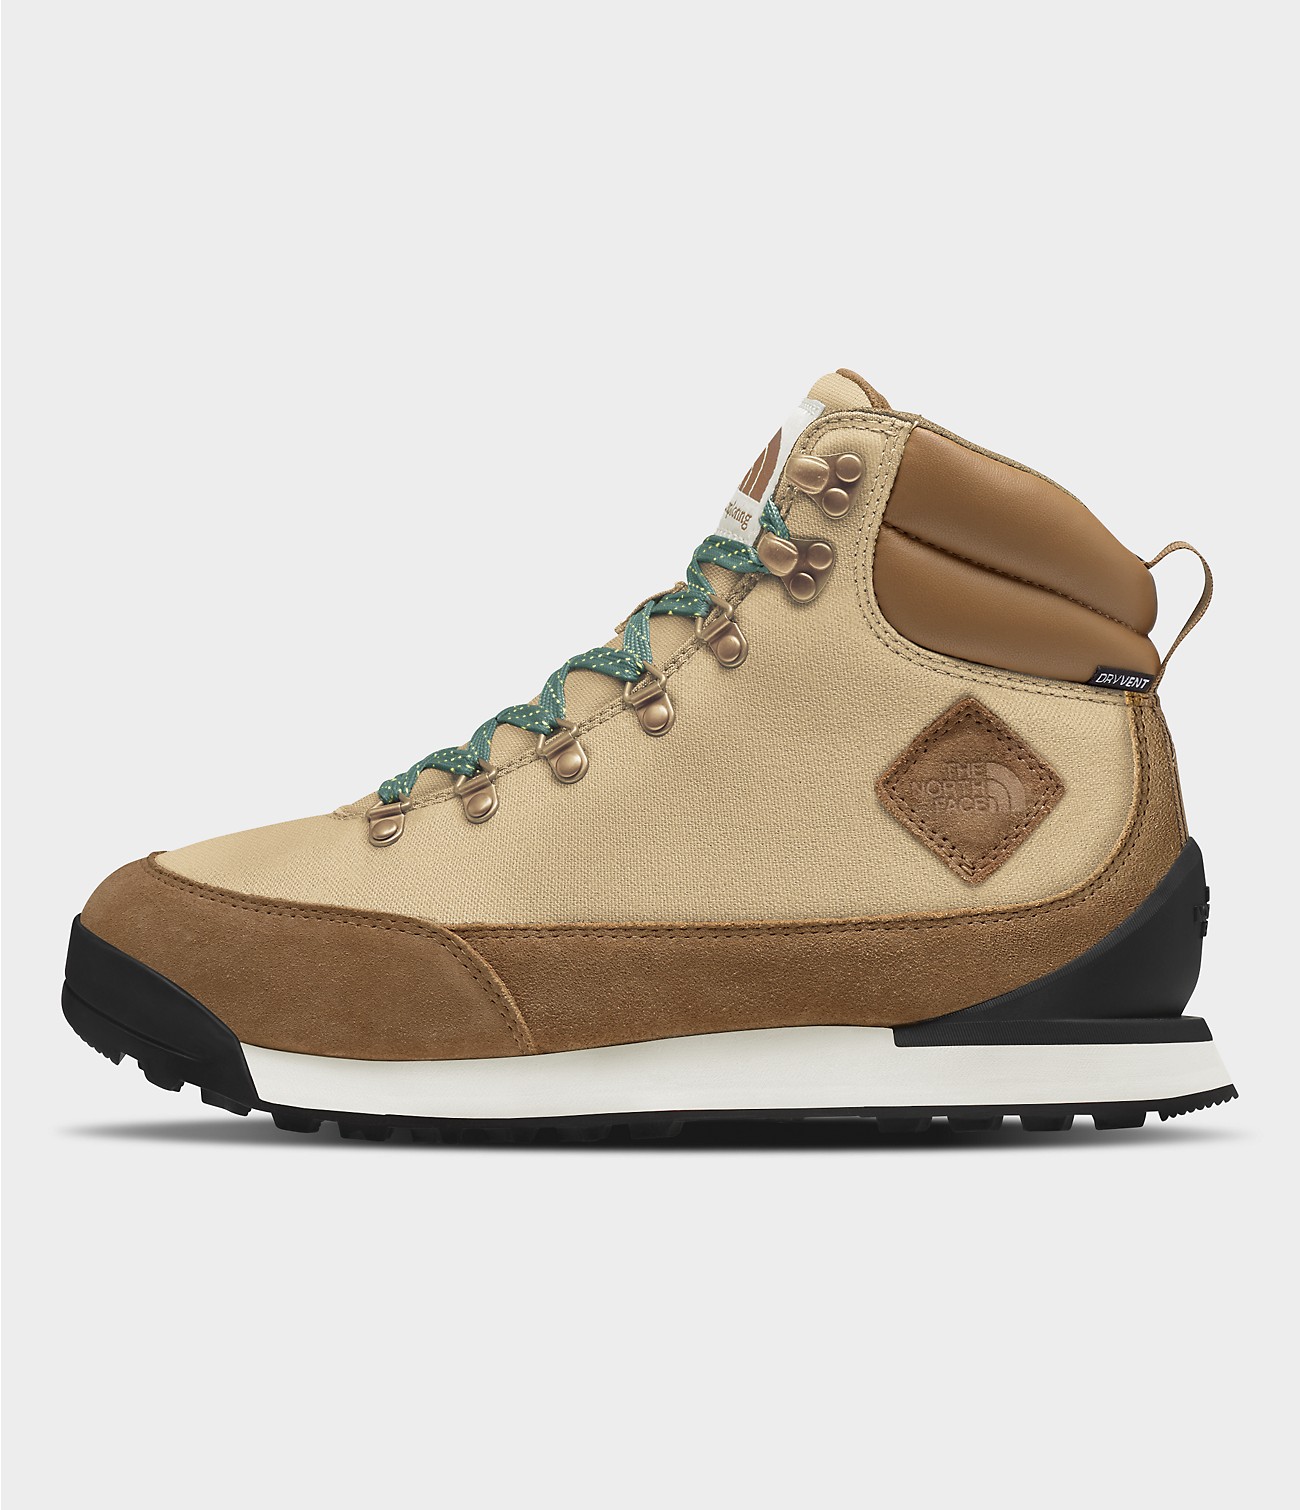 Women’s Back-To-Berkeley IV Textile Waterproof Boots | The North Face